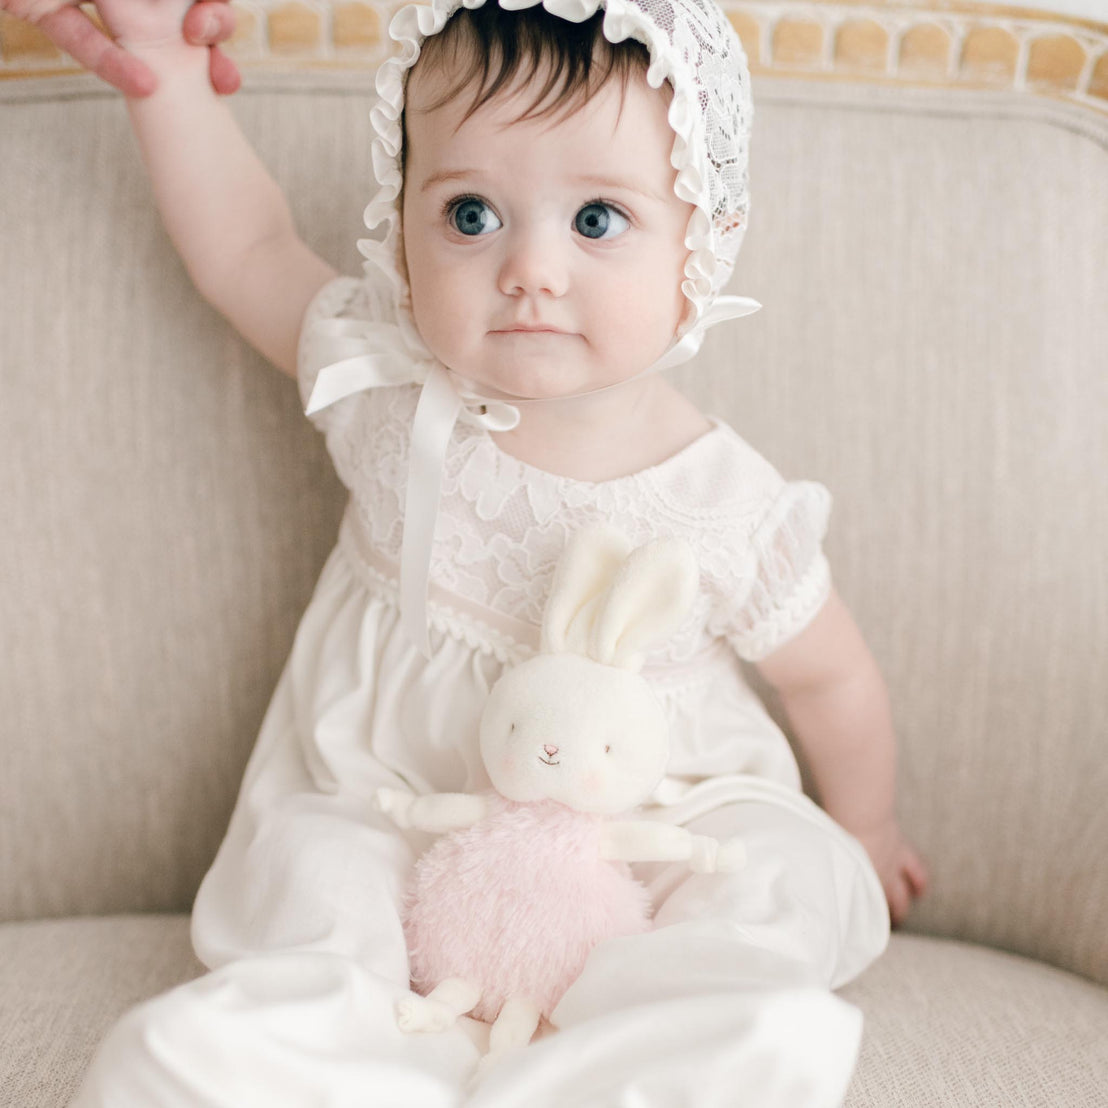 Baby girl in her baptism outfit with a plush bunny doll. Girl is sitting on couch holding her mother's hand.